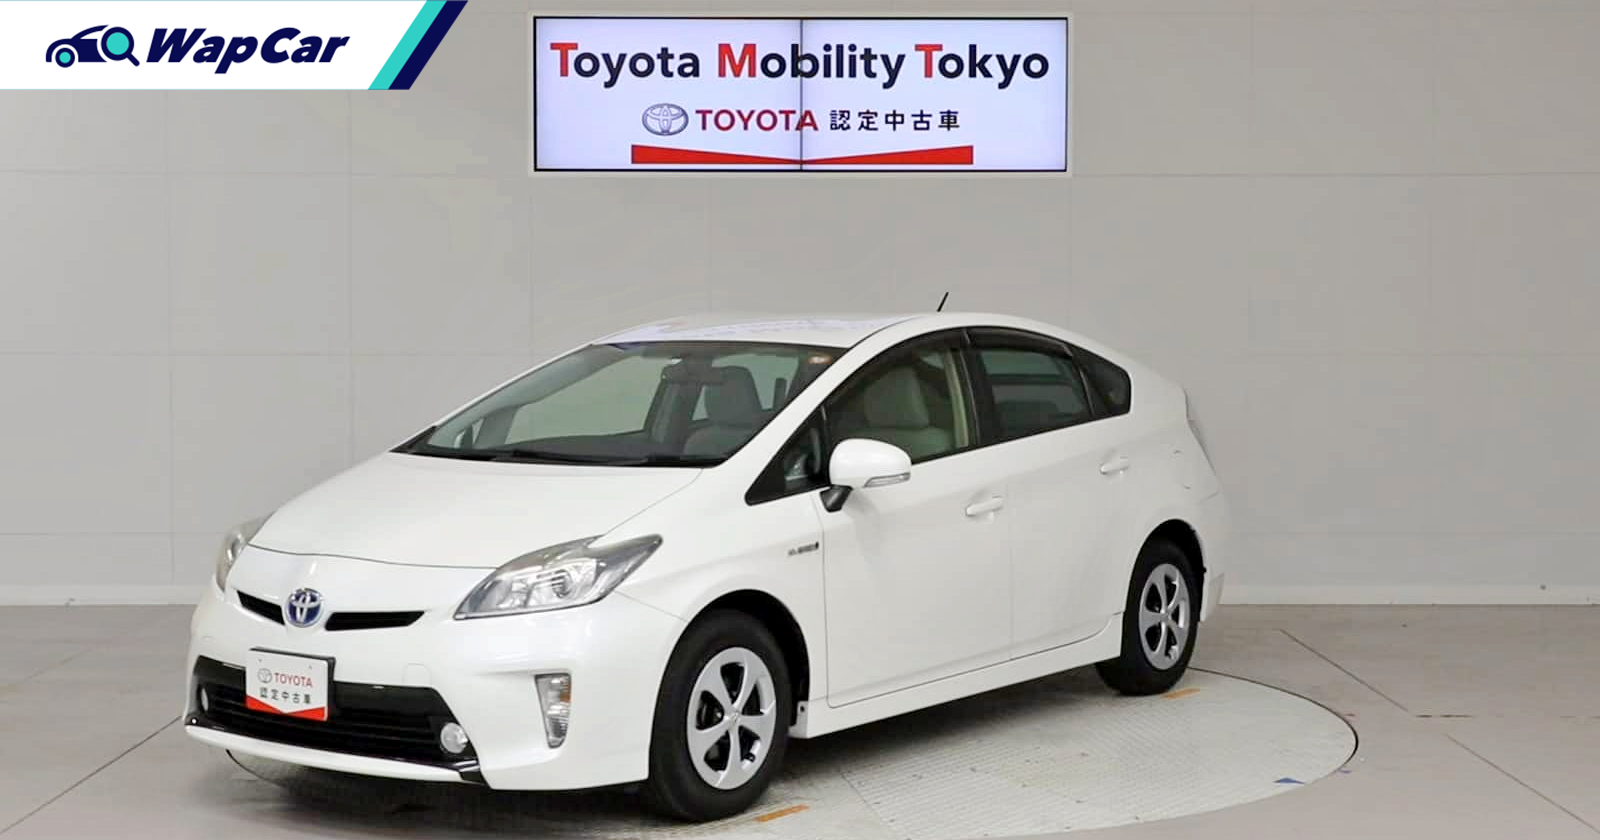 Petrol prices in Japan soared to RM 5.40 per litre, resale value of Toyota Prius rising in tandem 01